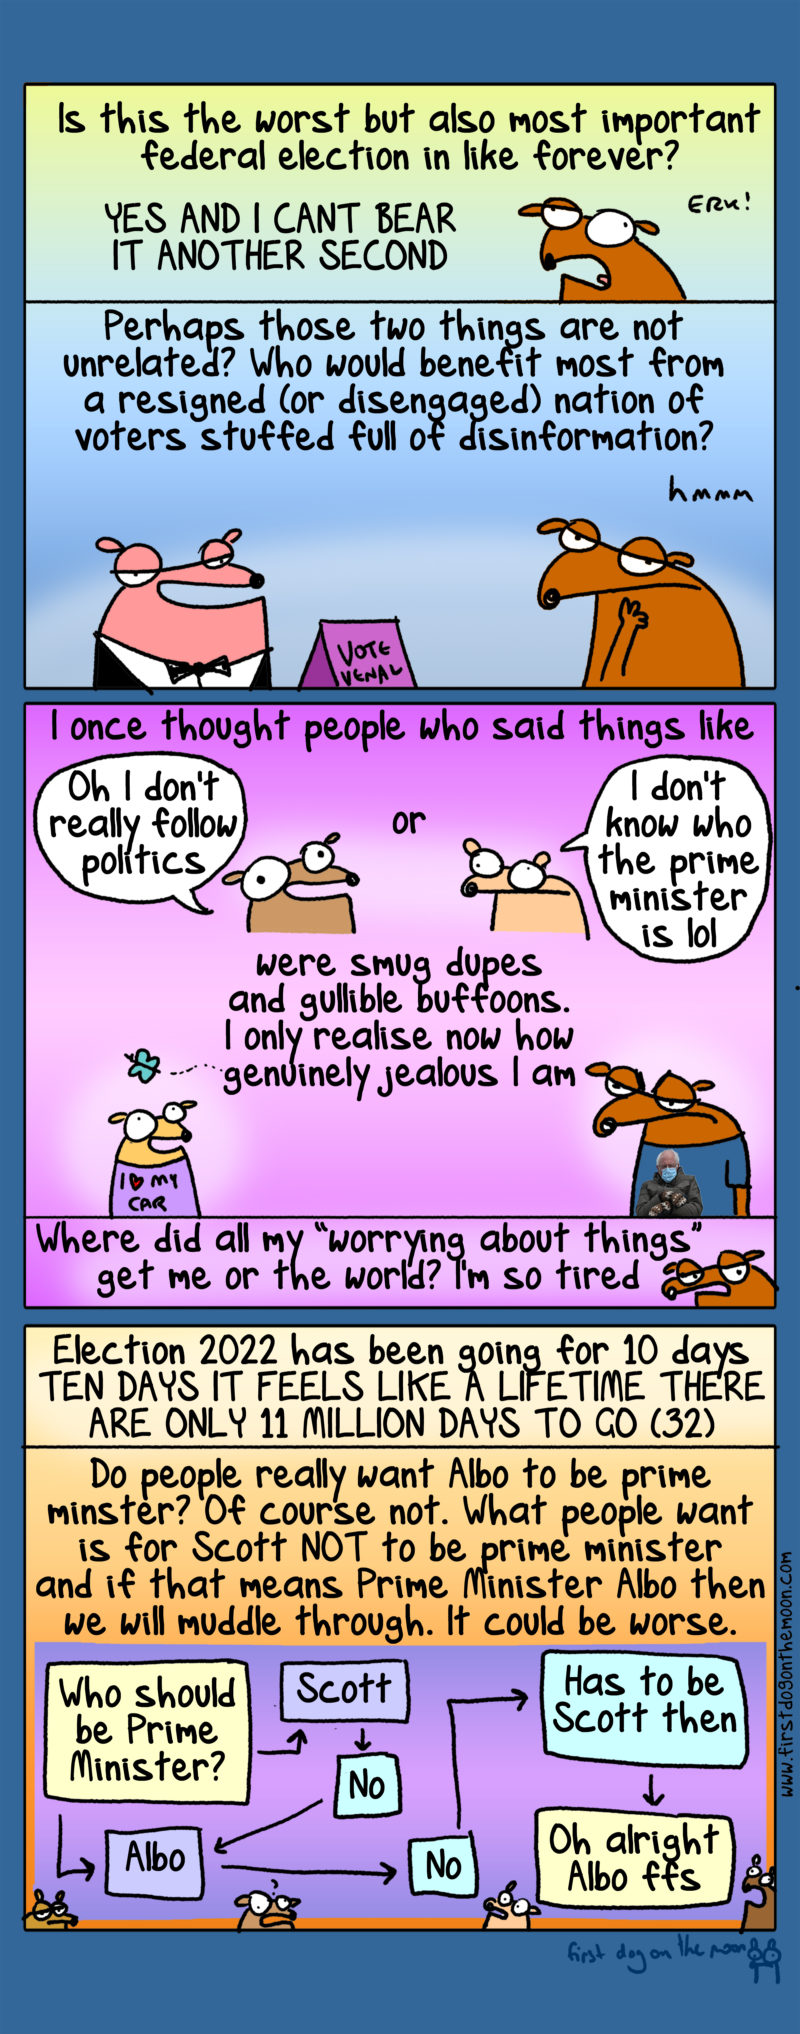 Is this the worst but also most important federal election in like forever?